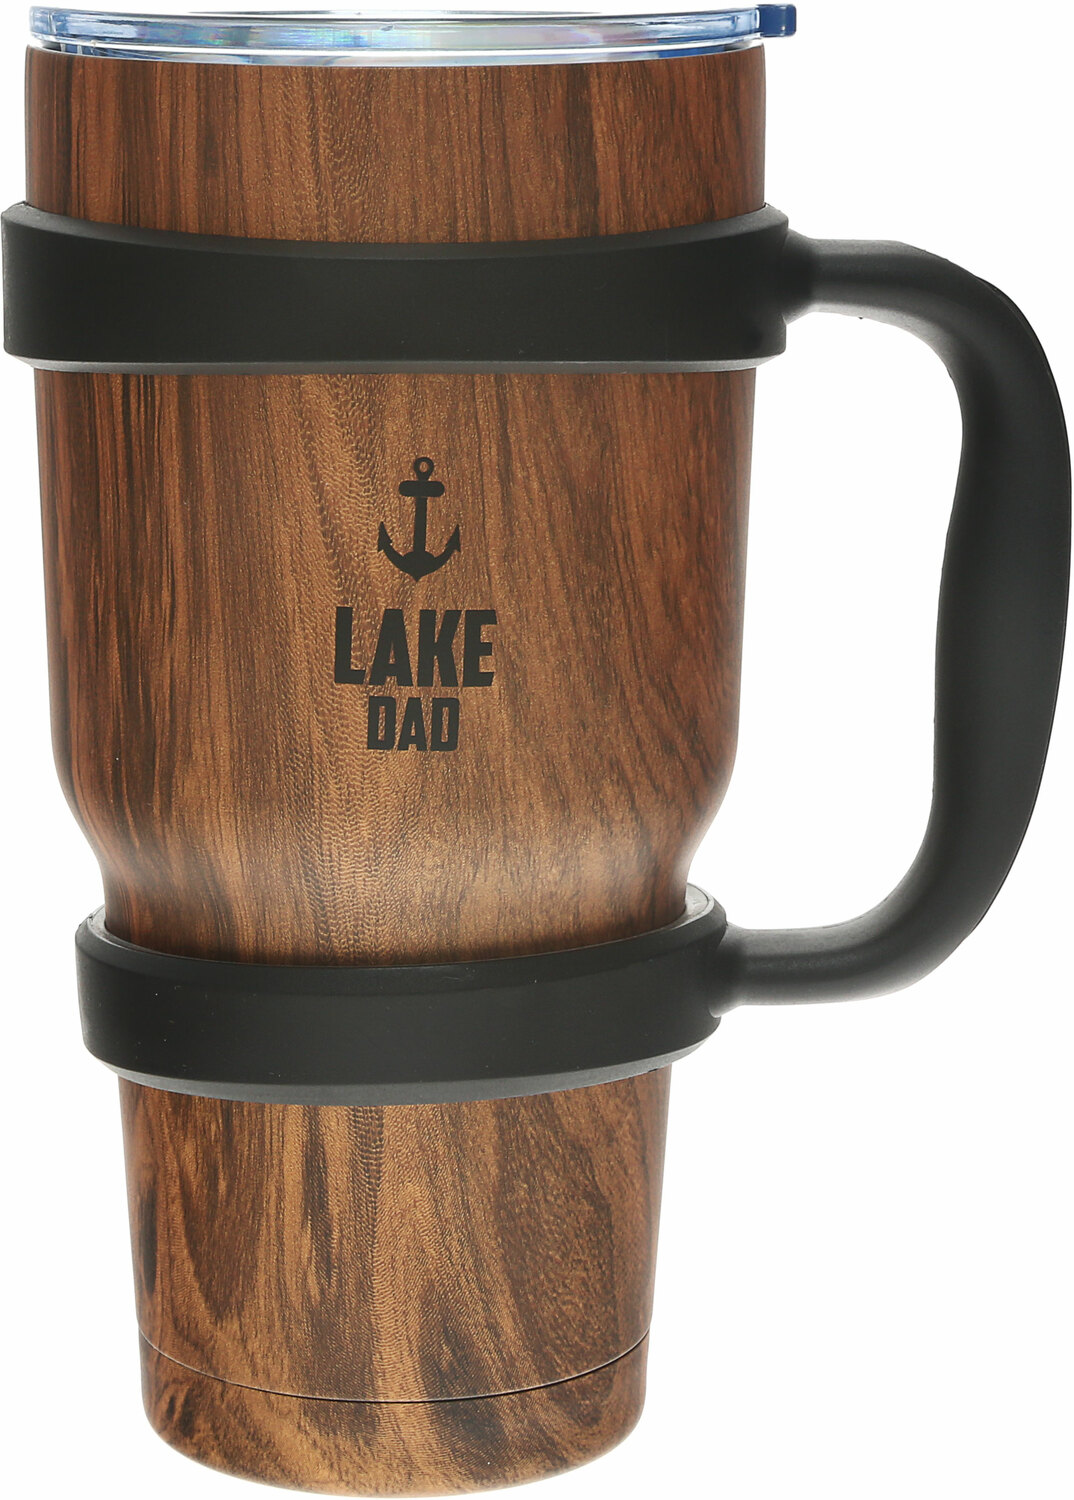 Lake Dad by Man Out - Lake Dad - 30 oz Stainless Steel Travel Tumbler with Handle